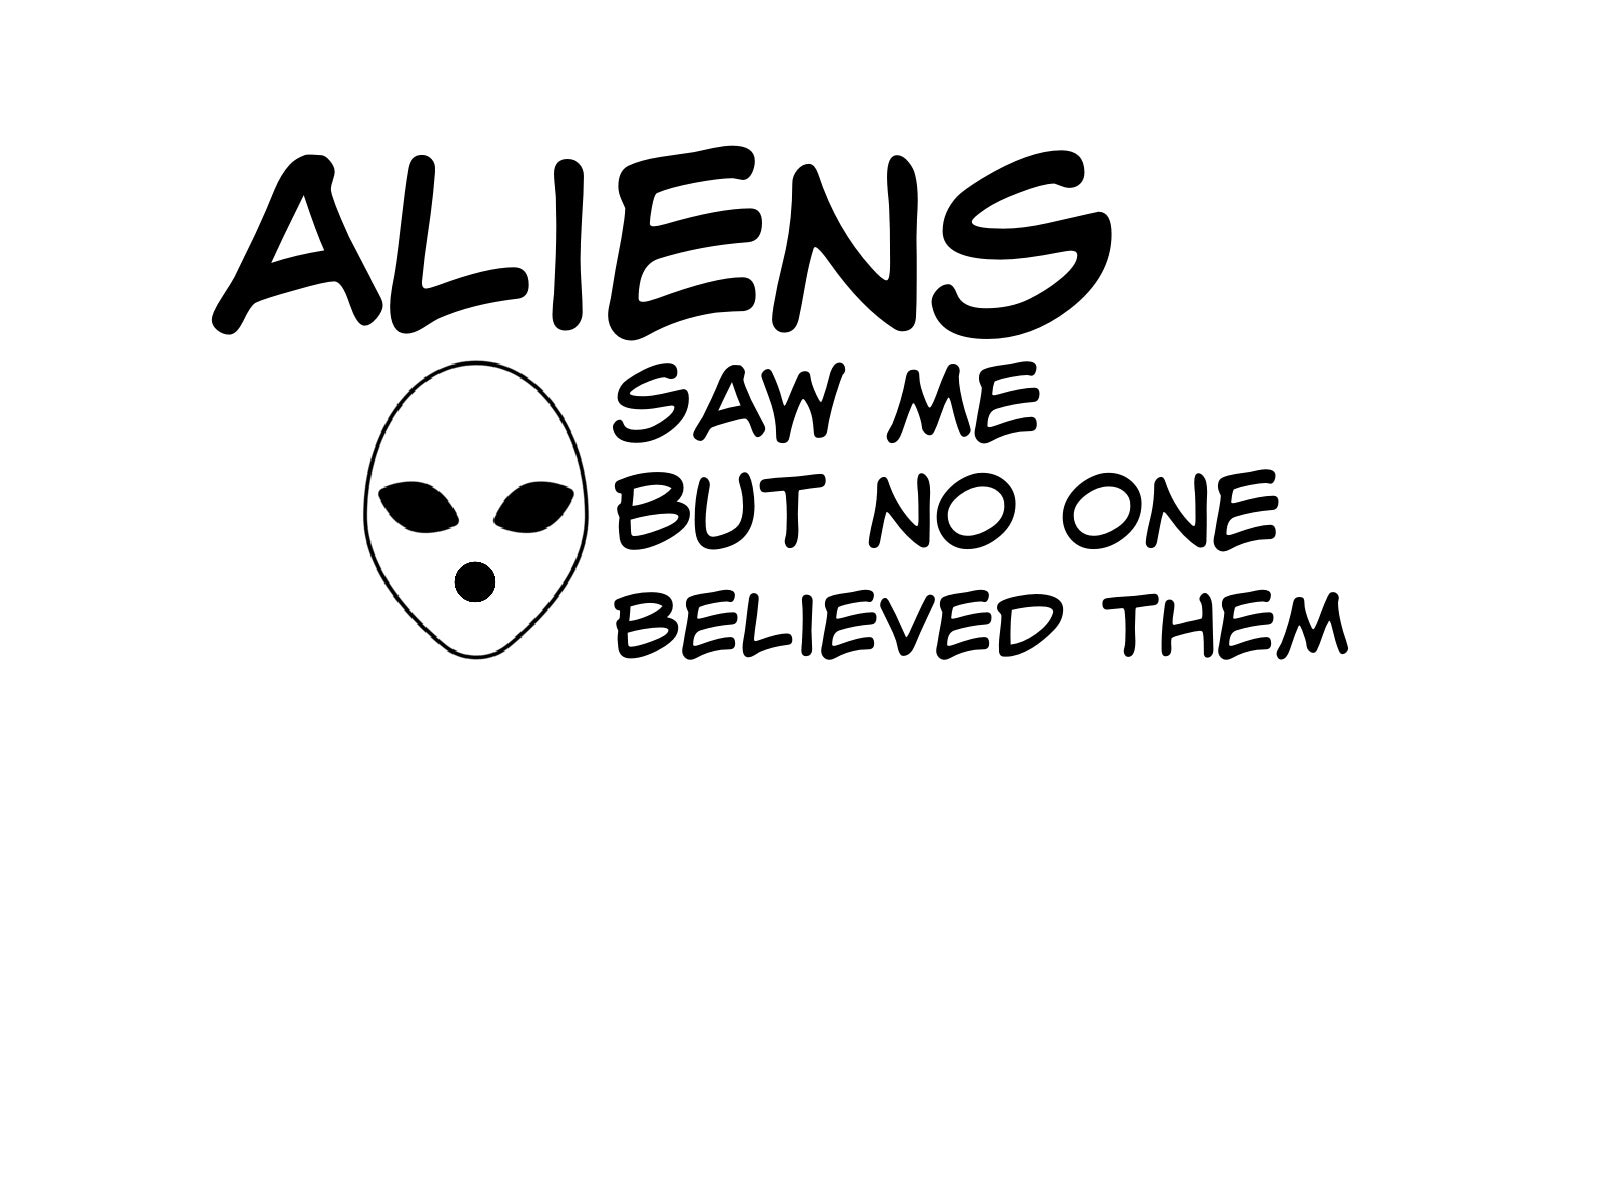 Aliens saw me. But no one believed them